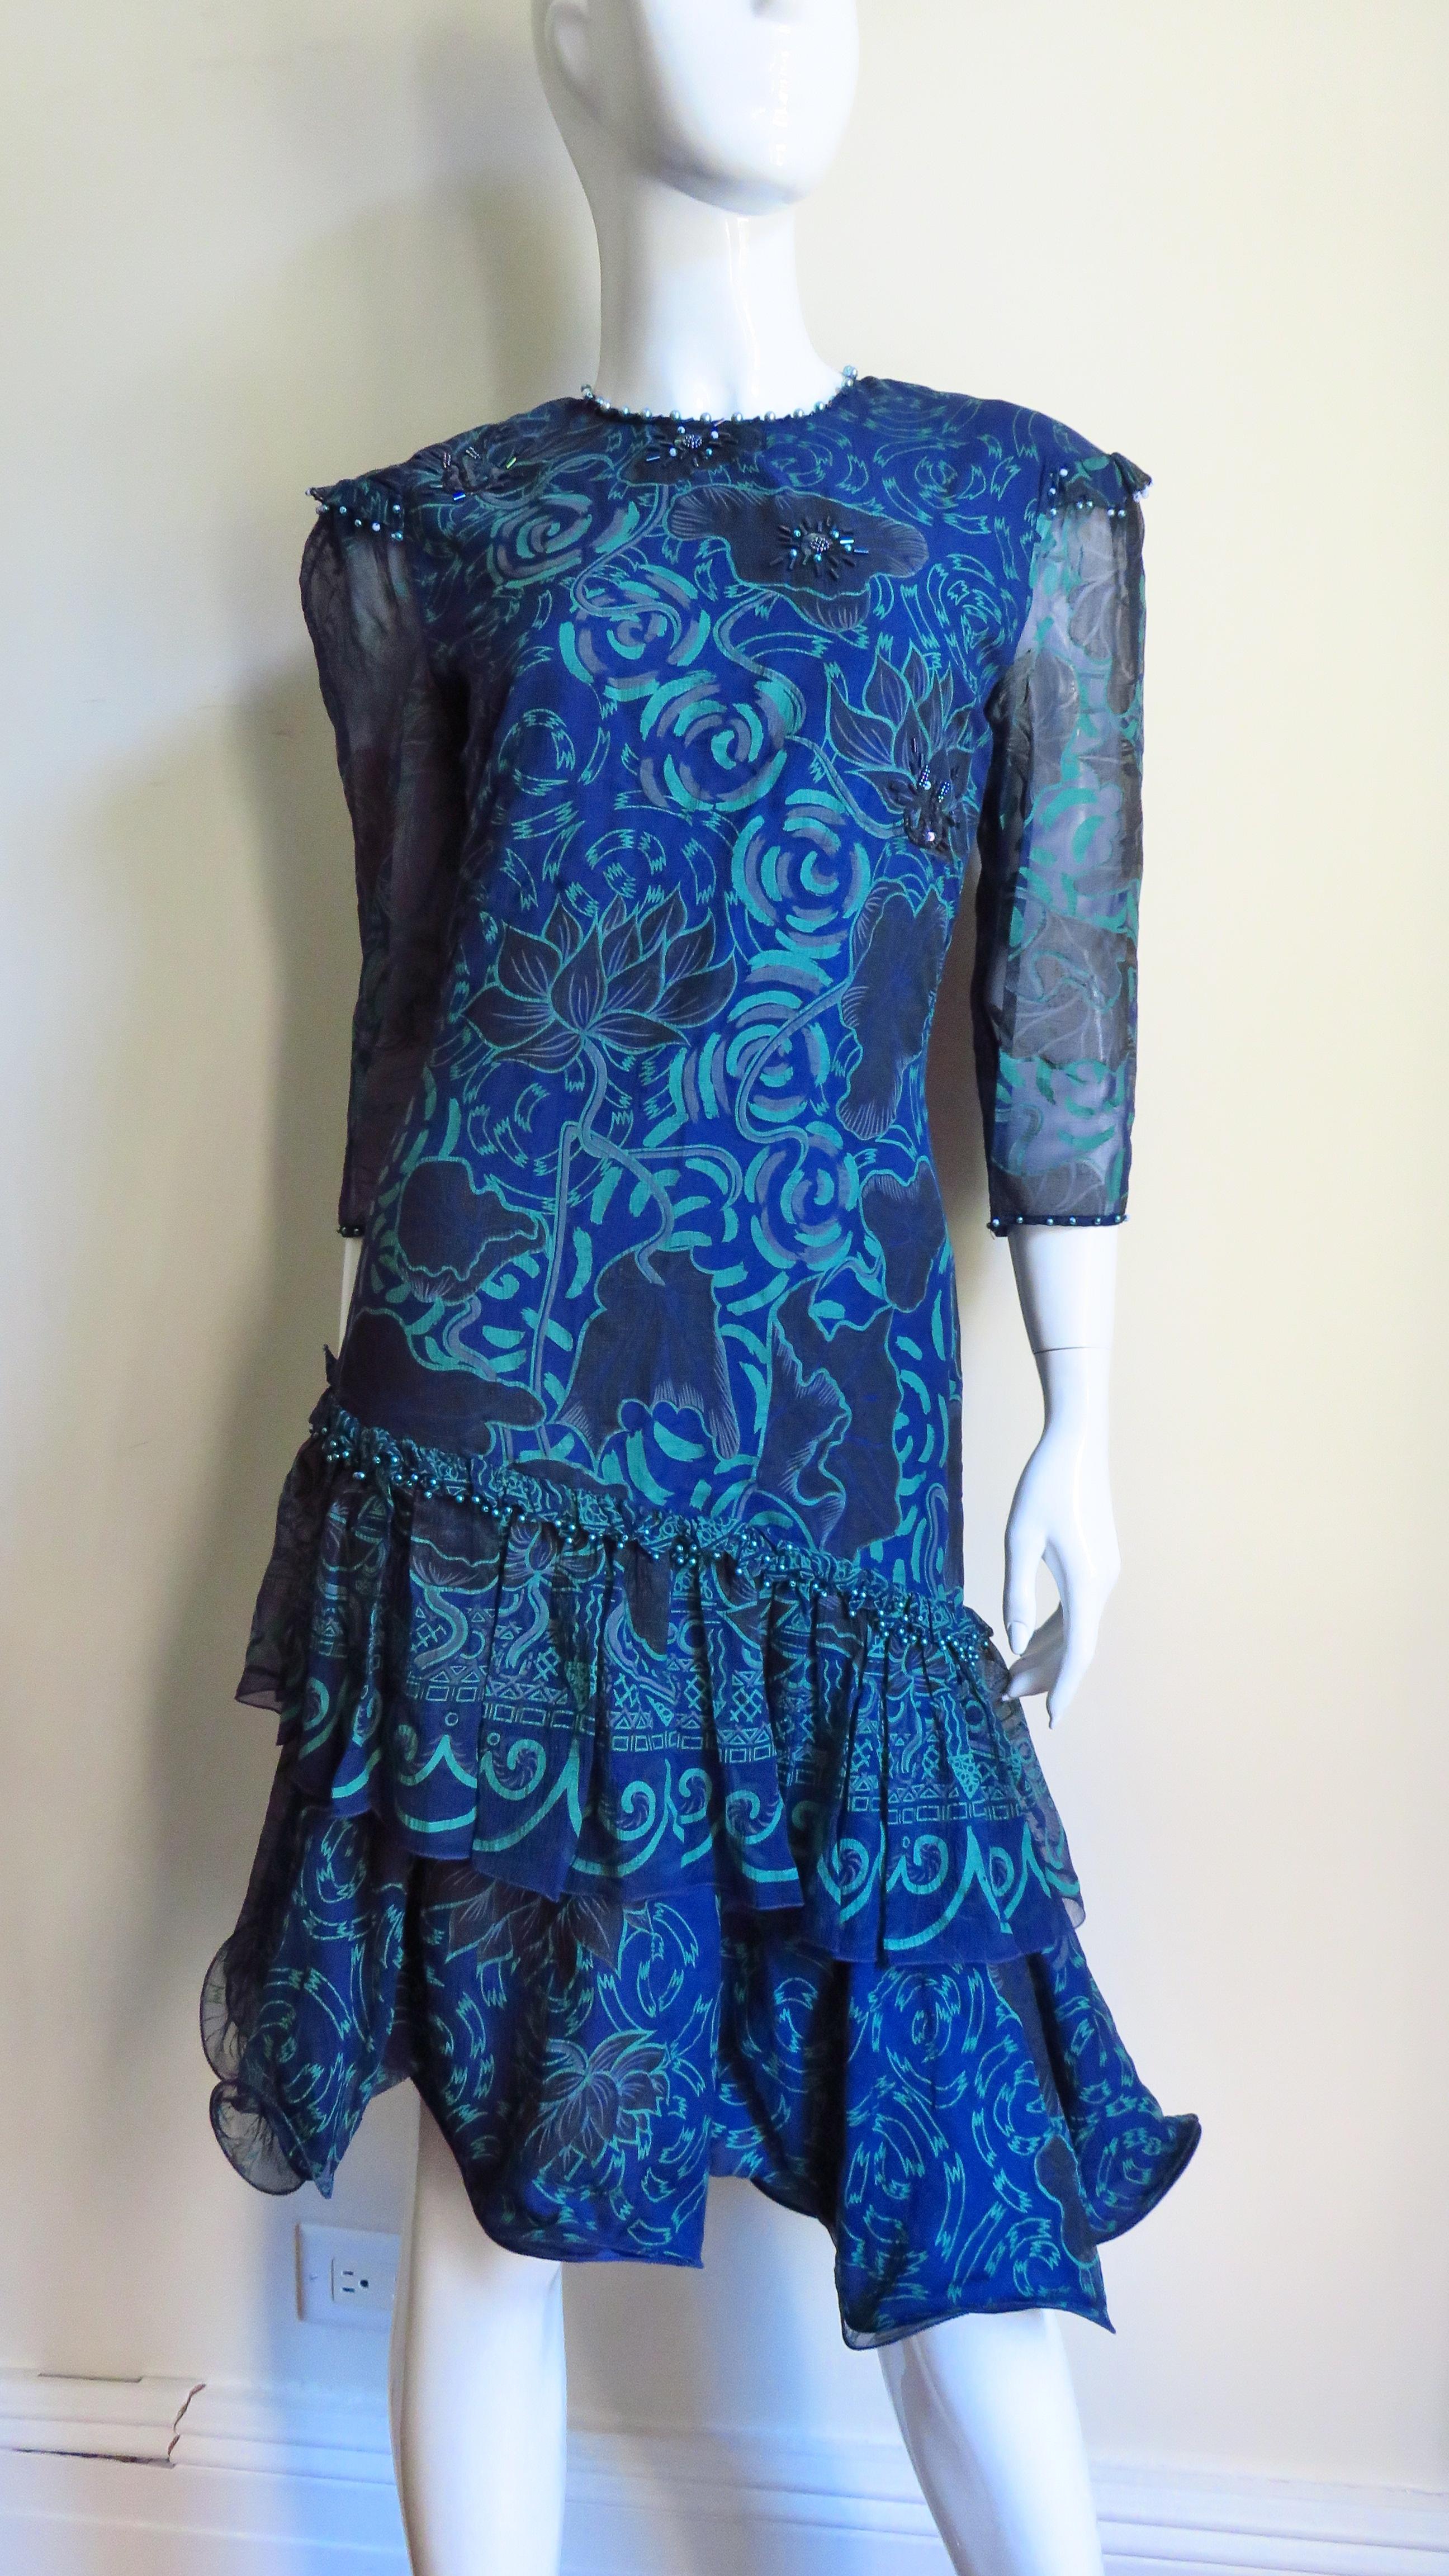 A great silk dress in a beautiful batique print in greens and blues from Zandra Rhodes. It has a crew  neckline, tiny ruffles at the shoulders and 3/4 length sleeves all trimmed in matching blue pearls.  The dress skims the body flaring at the hips